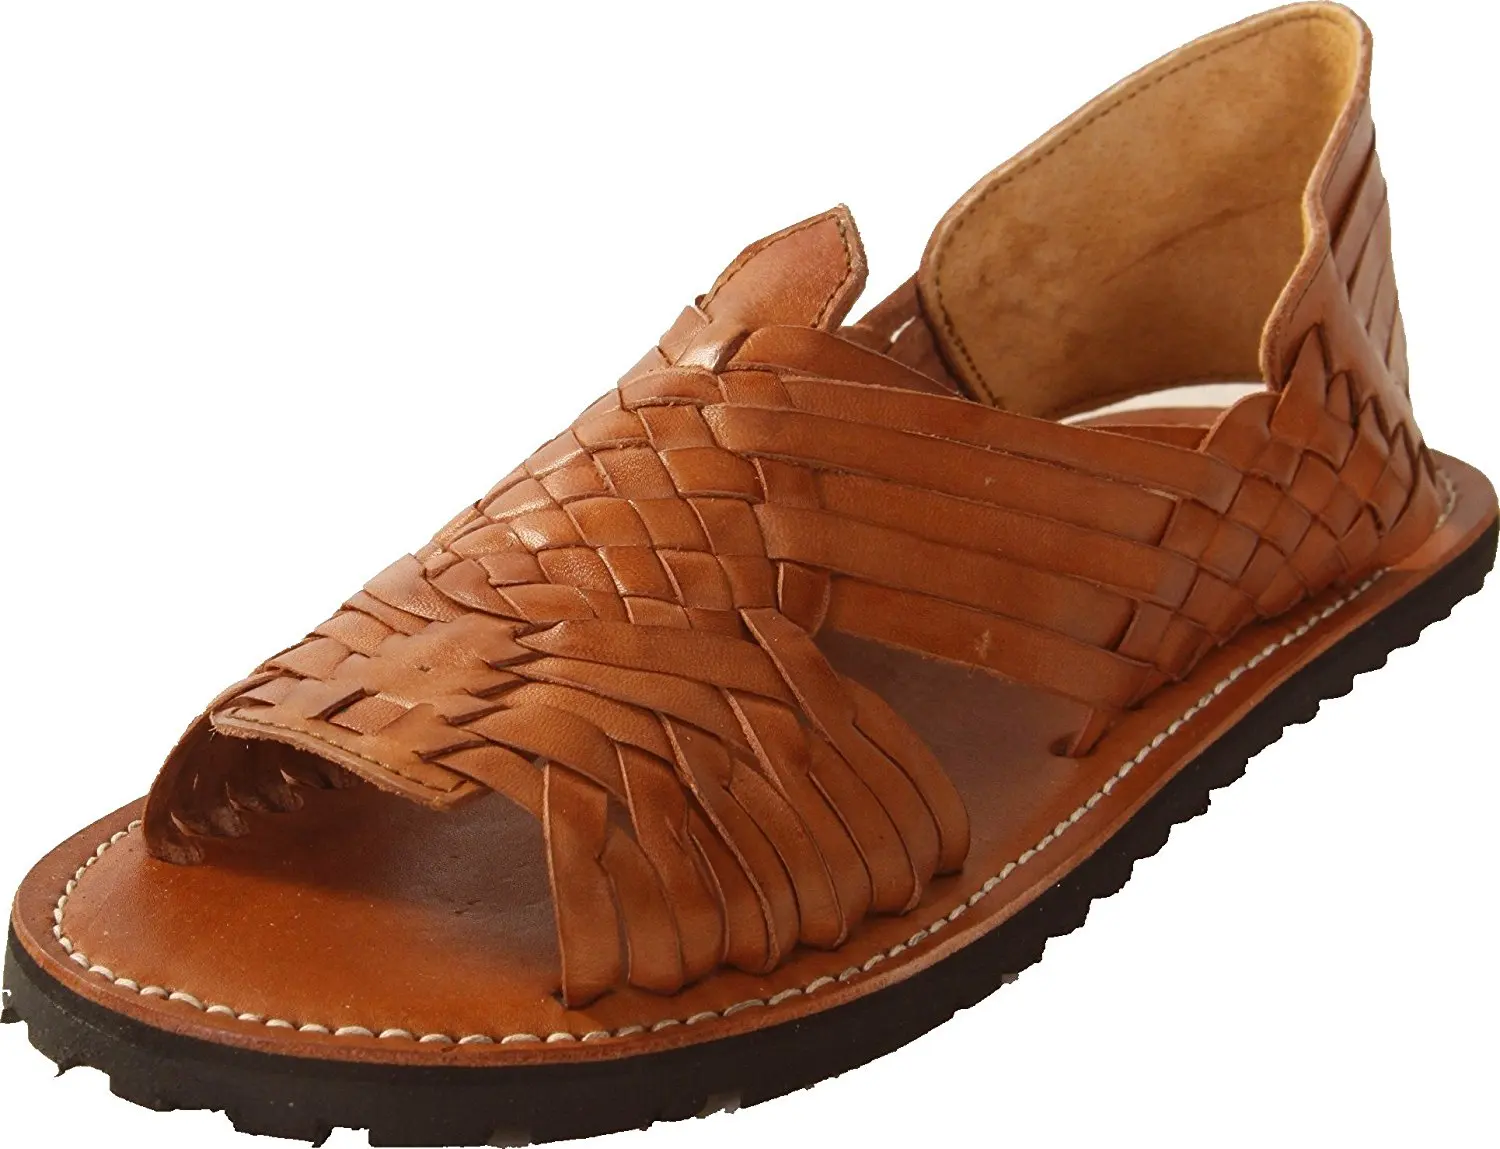 mexican sandals for men